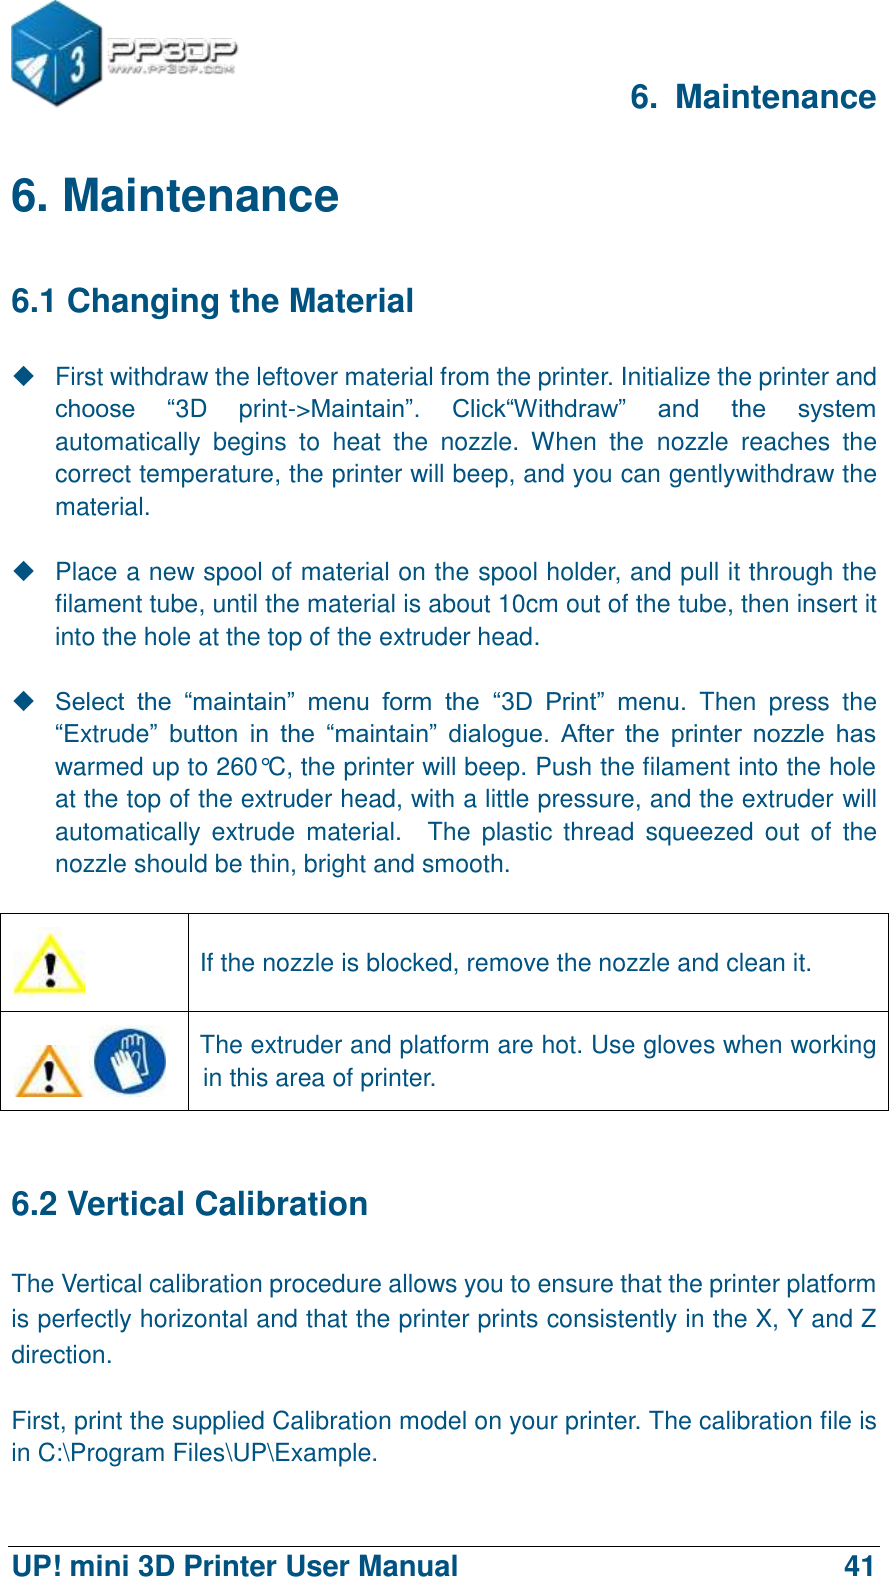      6.  Maintenance  UP! mini 3D Printer User Manual                                41 6. Maintenance 6.1 Changing the Material   First withdraw the leftover material from the printer. Initialize the printer and choose  “3D  print-&gt;Maintain”.  Click“Withdraw”  and  the  system automatically  begins  to  heat  the  nozzle.  When  the  nozzle  reaches  the correct temperature, the printer will beep, and you can gentlywithdraw the material.    Place a new spool of material on the spool holder, and pull it through the filament tube, until the material is about 10cm out of the tube, then insert it into the hole at the top of the extruder head.   Select  the  “maintain”  menu  form  the “3D  Print”  menu.  Then  press  the “Extrude”  button  in  the  “maintain”  dialogue.  After  the  printer  nozzle  has warmed up to 260°C, the printer will beep. Push the filament into the hole at the top of the extruder head, with a little pressure, and the extruder will automatically extrude  material.    The  plastic  thread  squeezed  out of  the nozzle should be thin, bright and smooth.     If the nozzle is blocked, remove the nozzle and clean it.  The extruder and platform are hot. Use gloves when working in this area of printer.    6.2 Vertical Calibration The Vertical calibration procedure allows you to ensure that the printer platform is perfectly horizontal and that the printer prints consistently in the X, Y and Z direction.  First, print the supplied Calibration model on your printer. The calibration file is in C:\Program Files\UP\Example.   